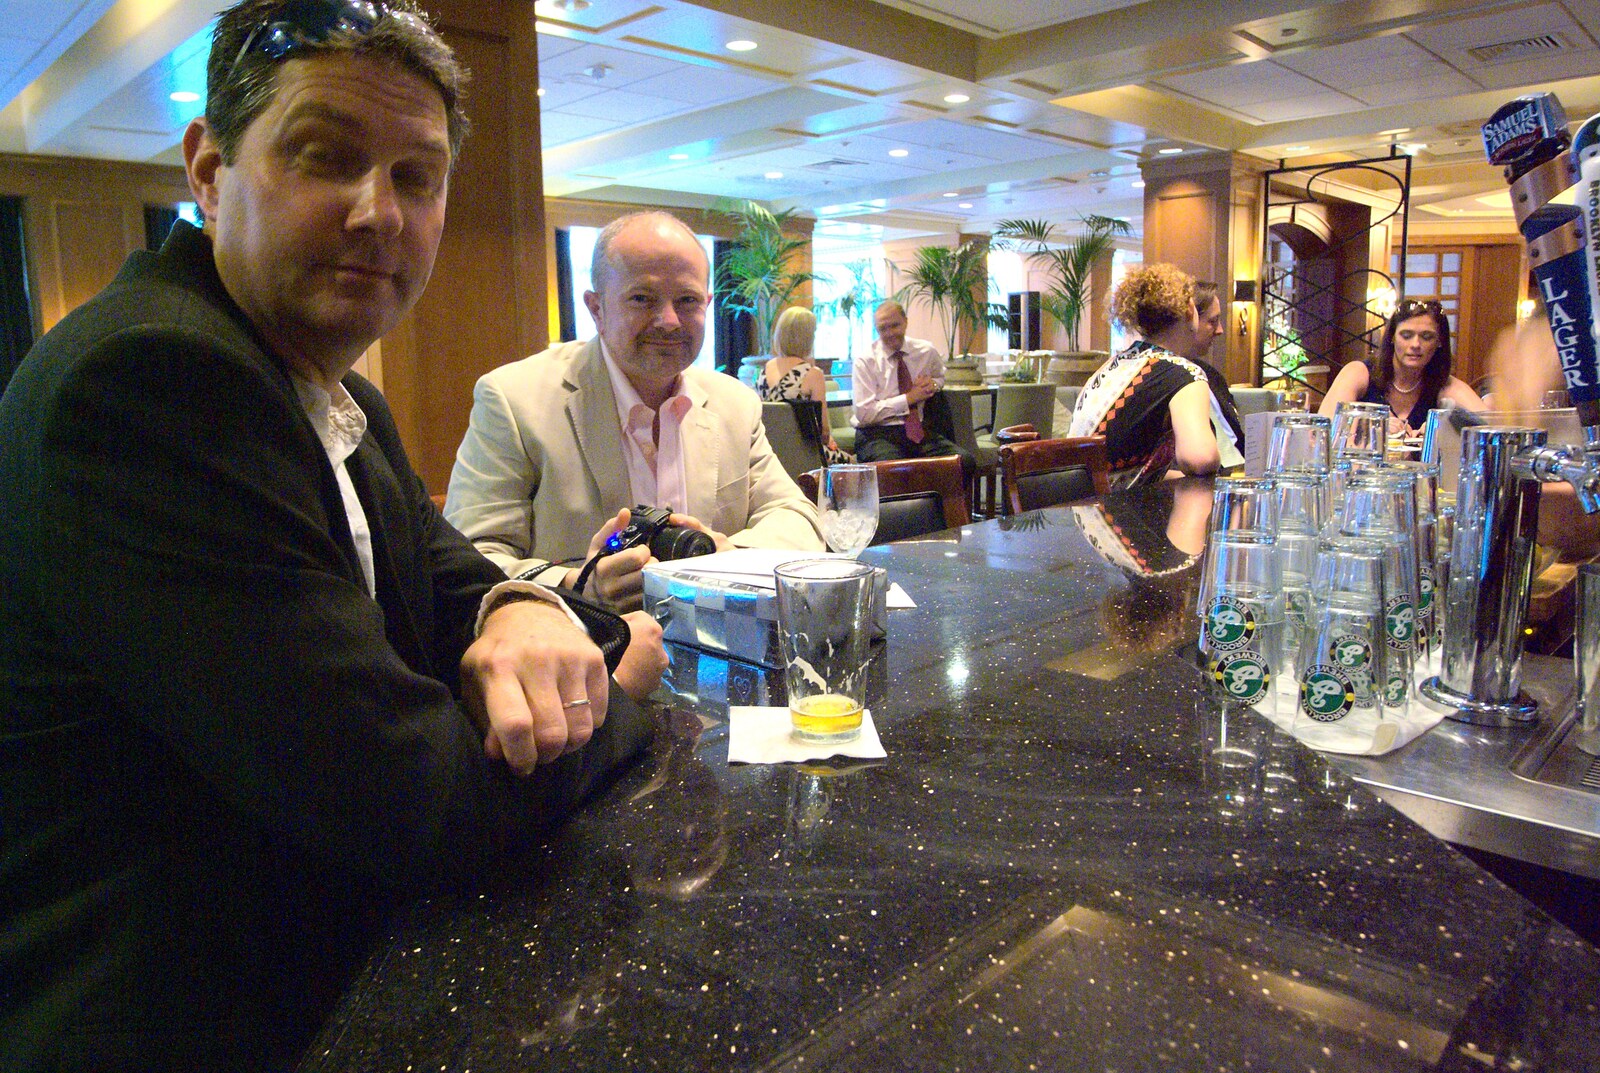 Sean and Hamish in the bar at Short Hills Hilton from Phil and Tania's Wedding, Short Hills, New Jersey, USA - 20th August 2011